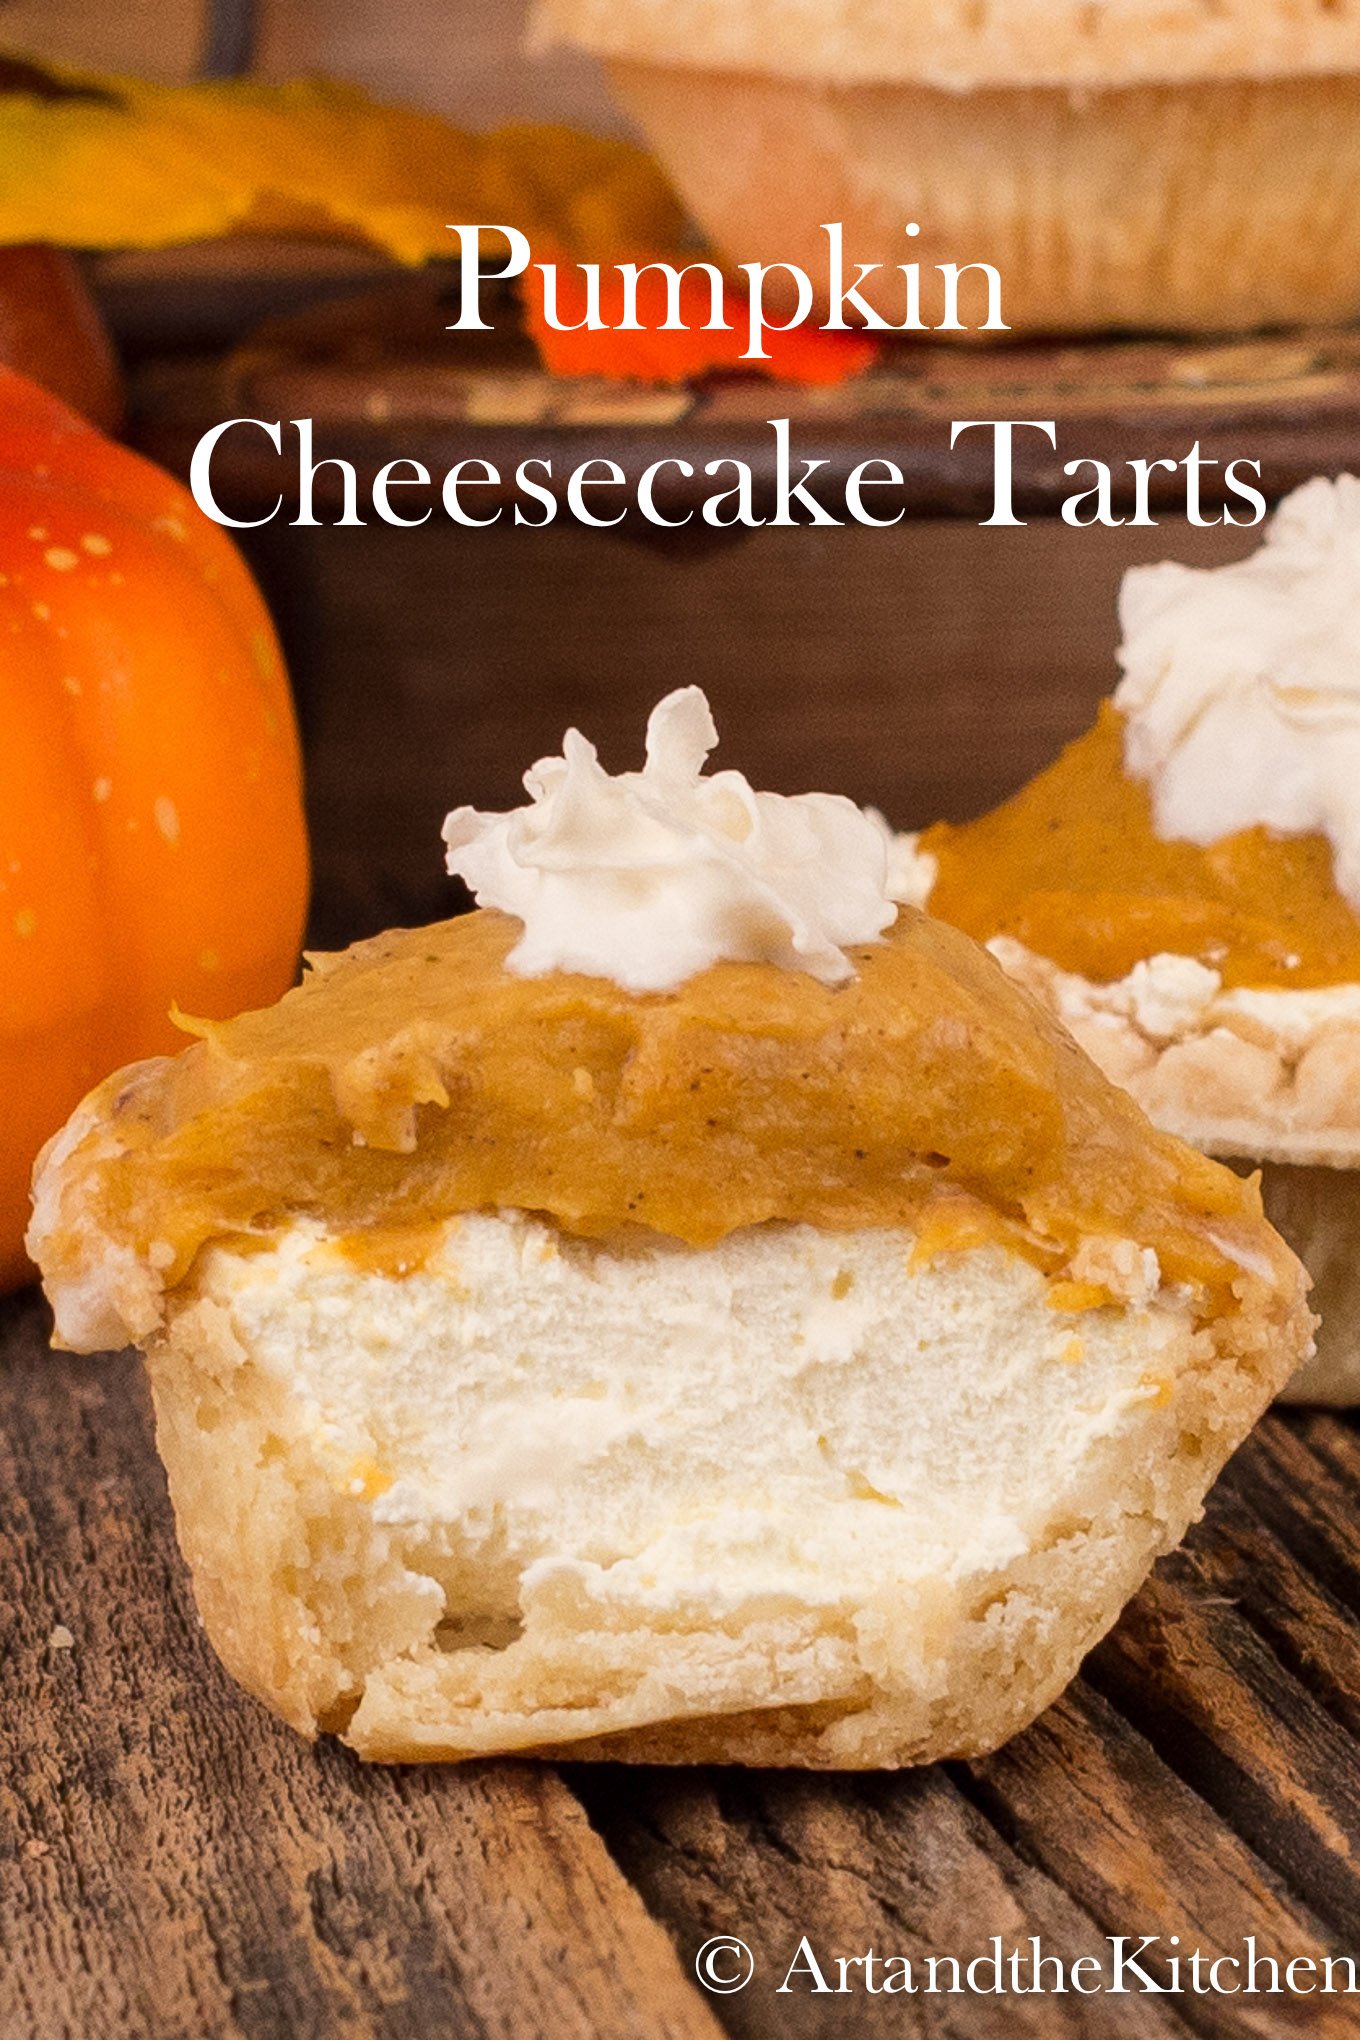 Single tart with layers of cream cheese, pumpkin filling and a dollop of whipped cream.